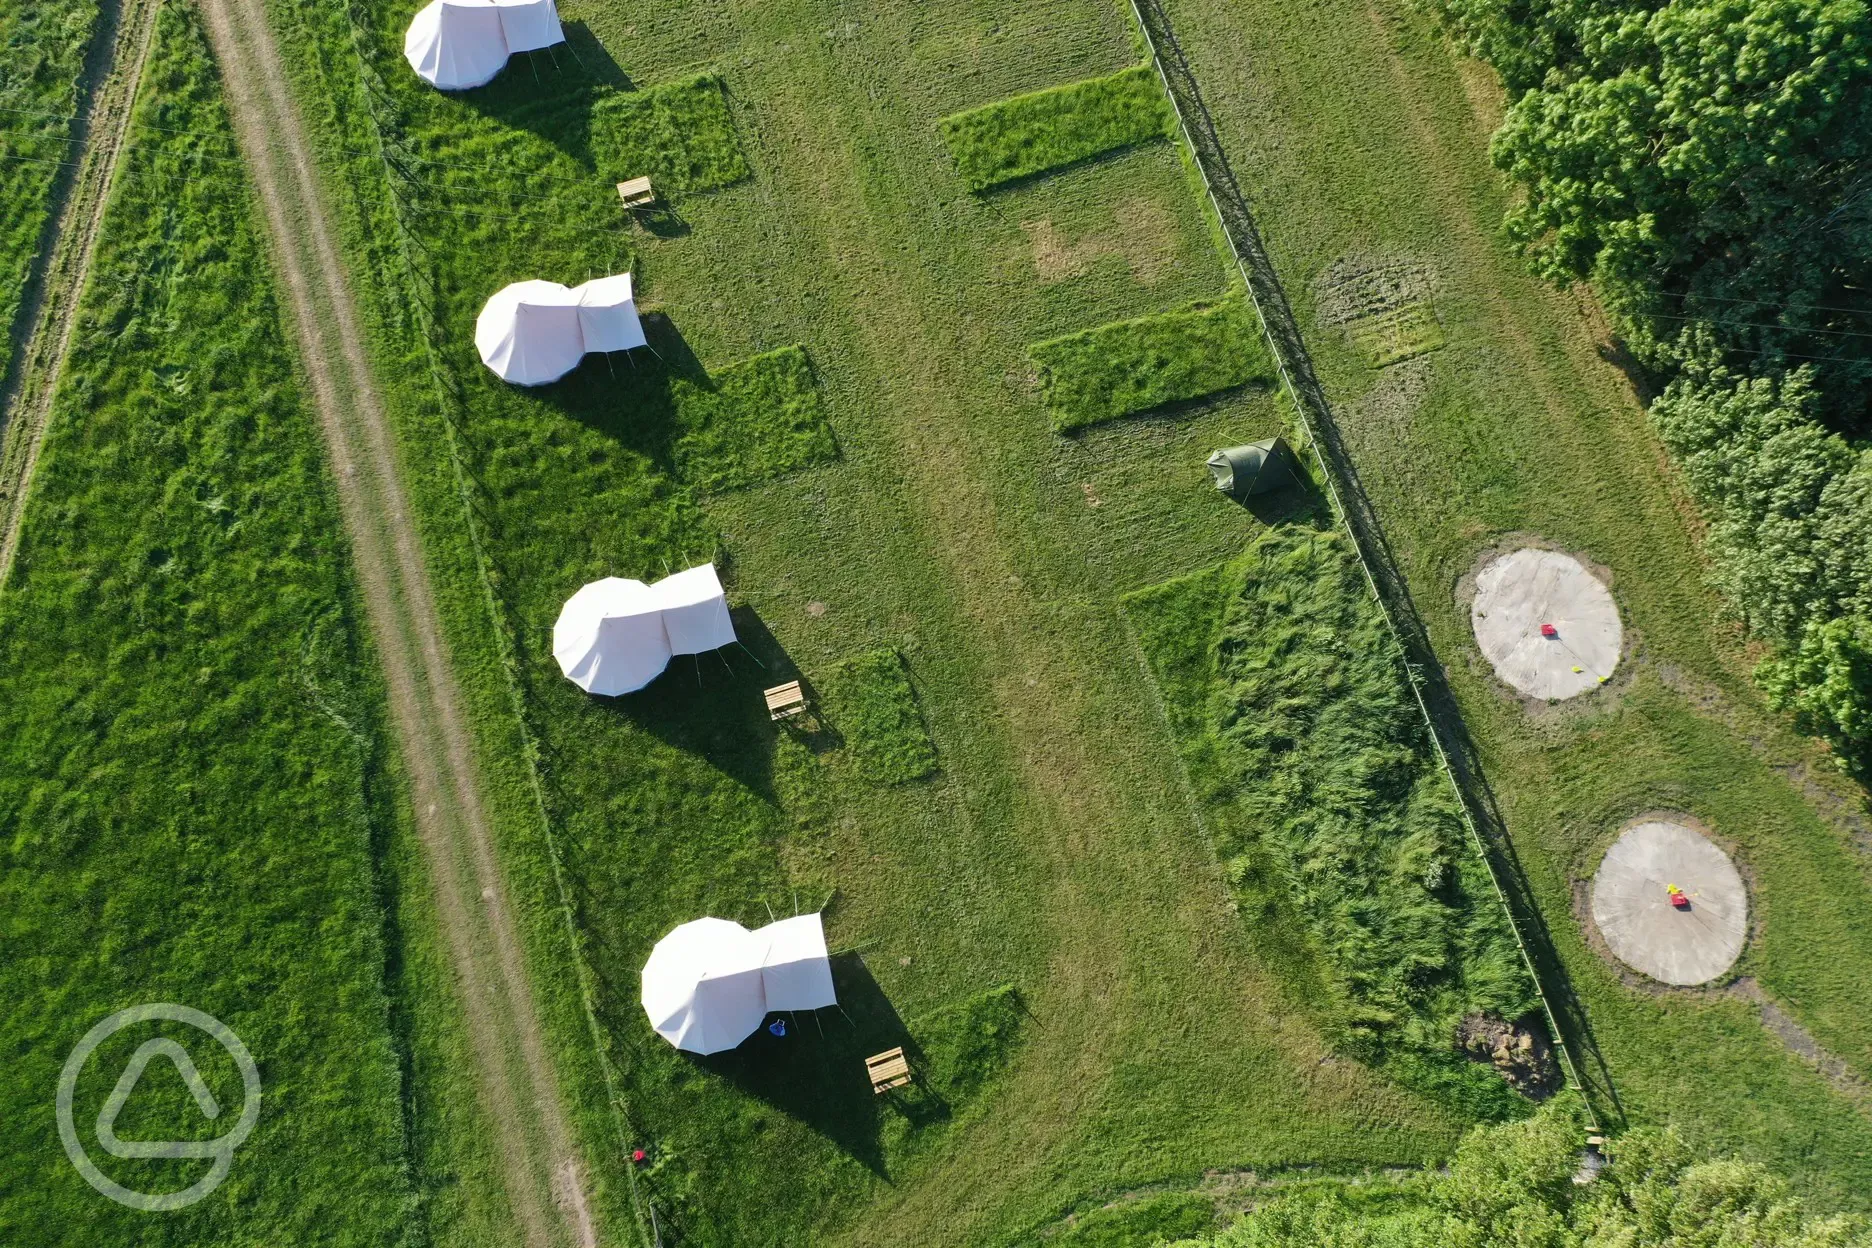 Bird's eye view of the bell tents